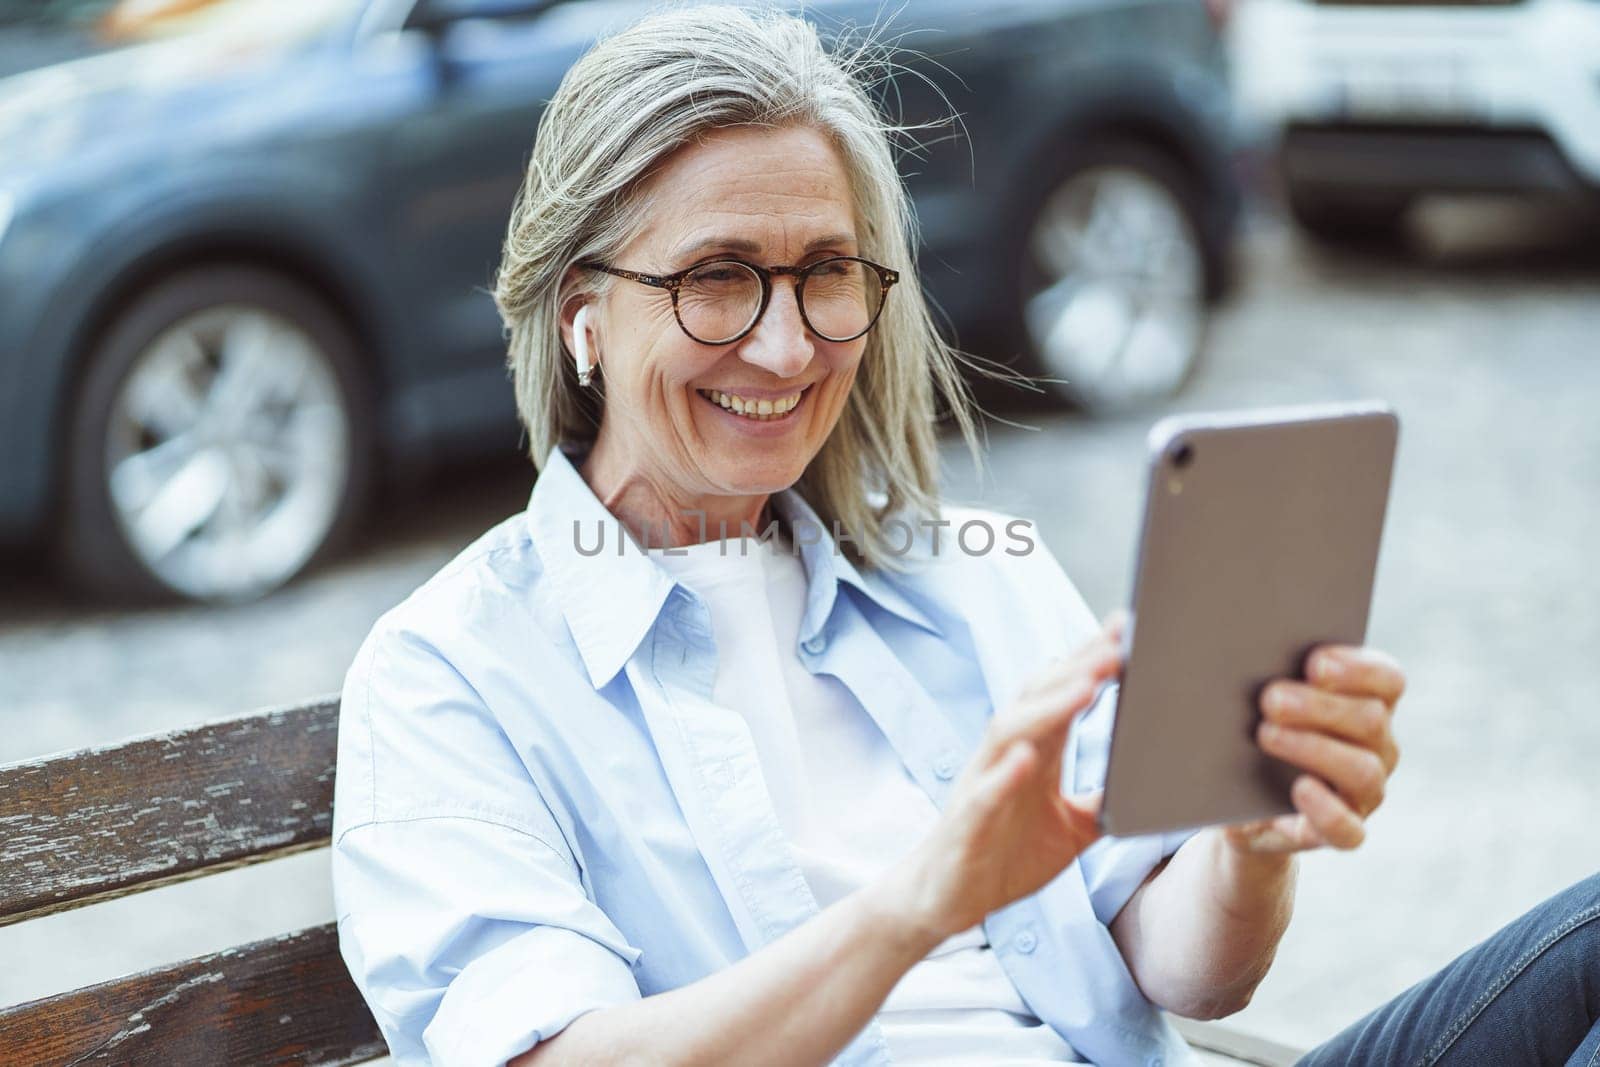 Integration of technology and daily lives of older individuals, and their ability to stay connected and engage in digital communication. Happy senior lady enjoying online conversation on tablet PC. High quality photo